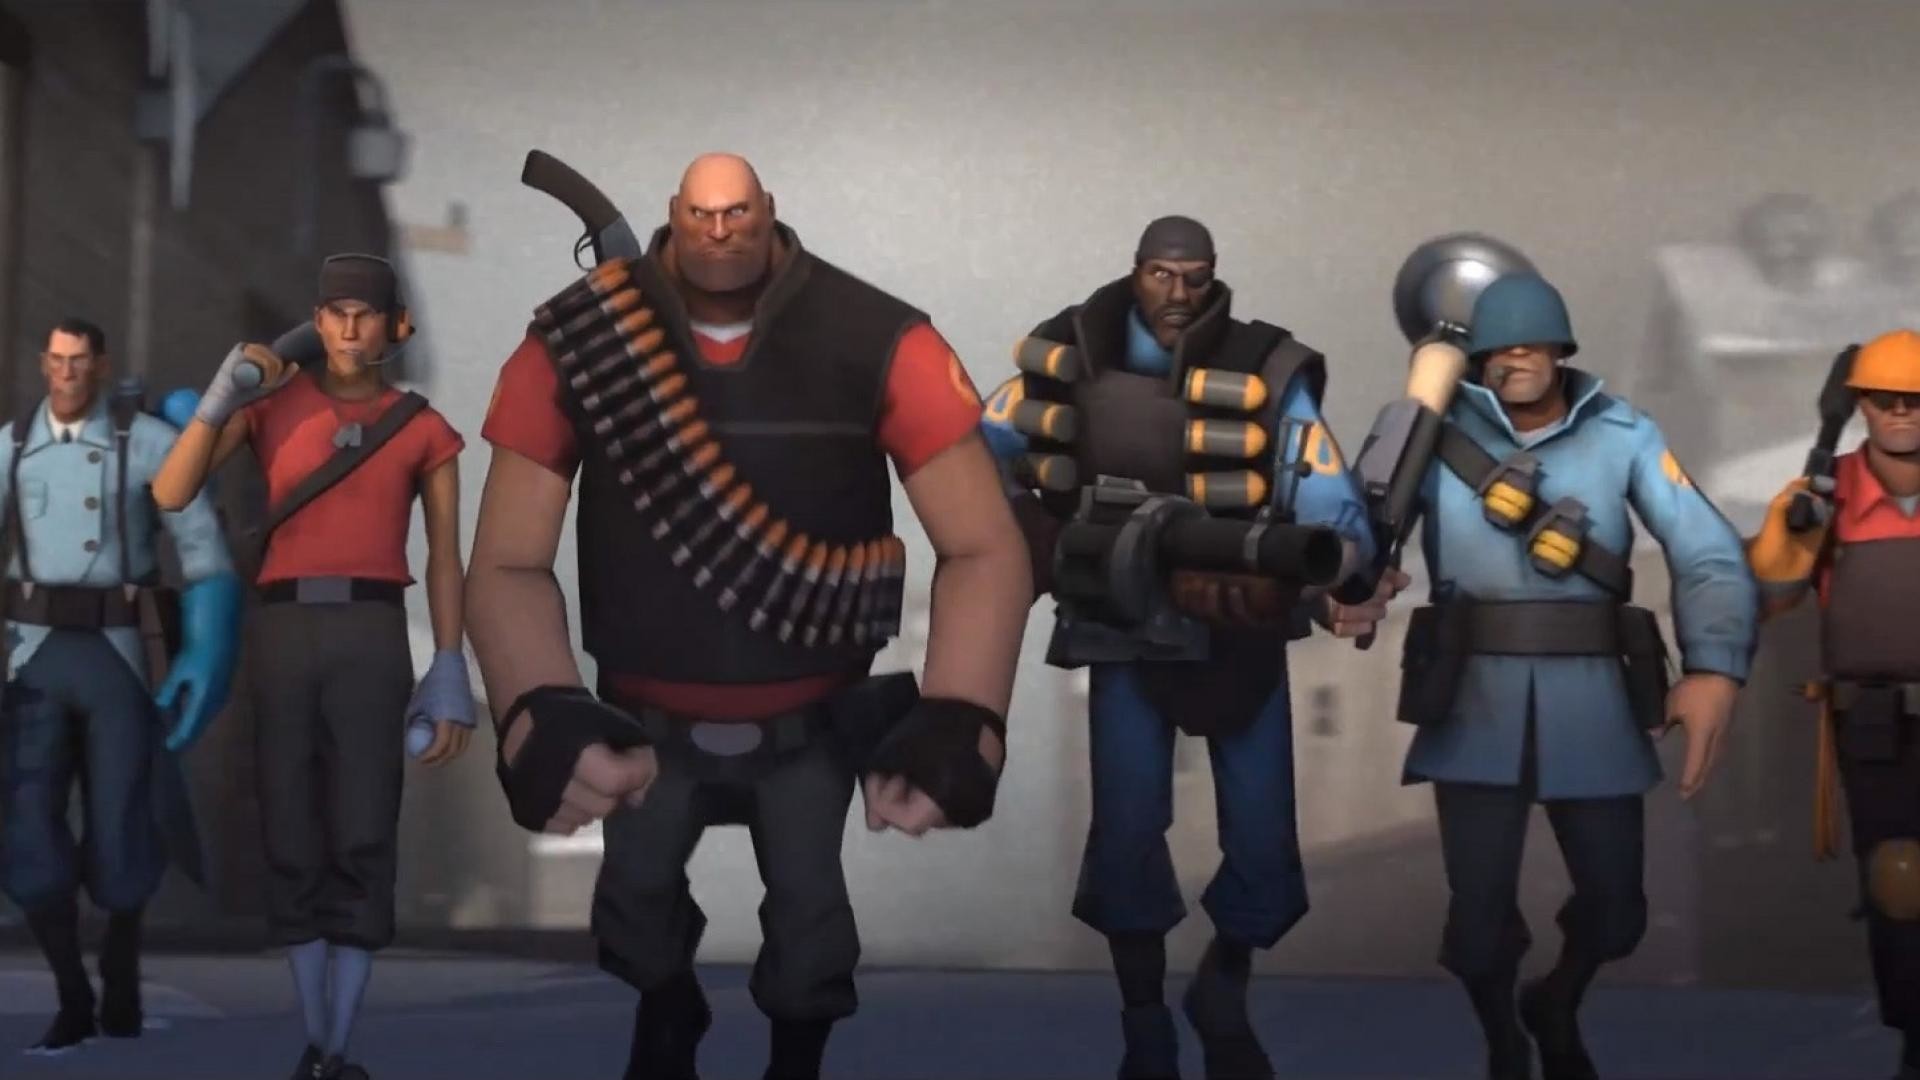 1920x1080 video Games Team Fortress Wallpapers HD Desktop and Mobile | HD Wallpapers  | Pinterest | Team fortress and Wallpaper